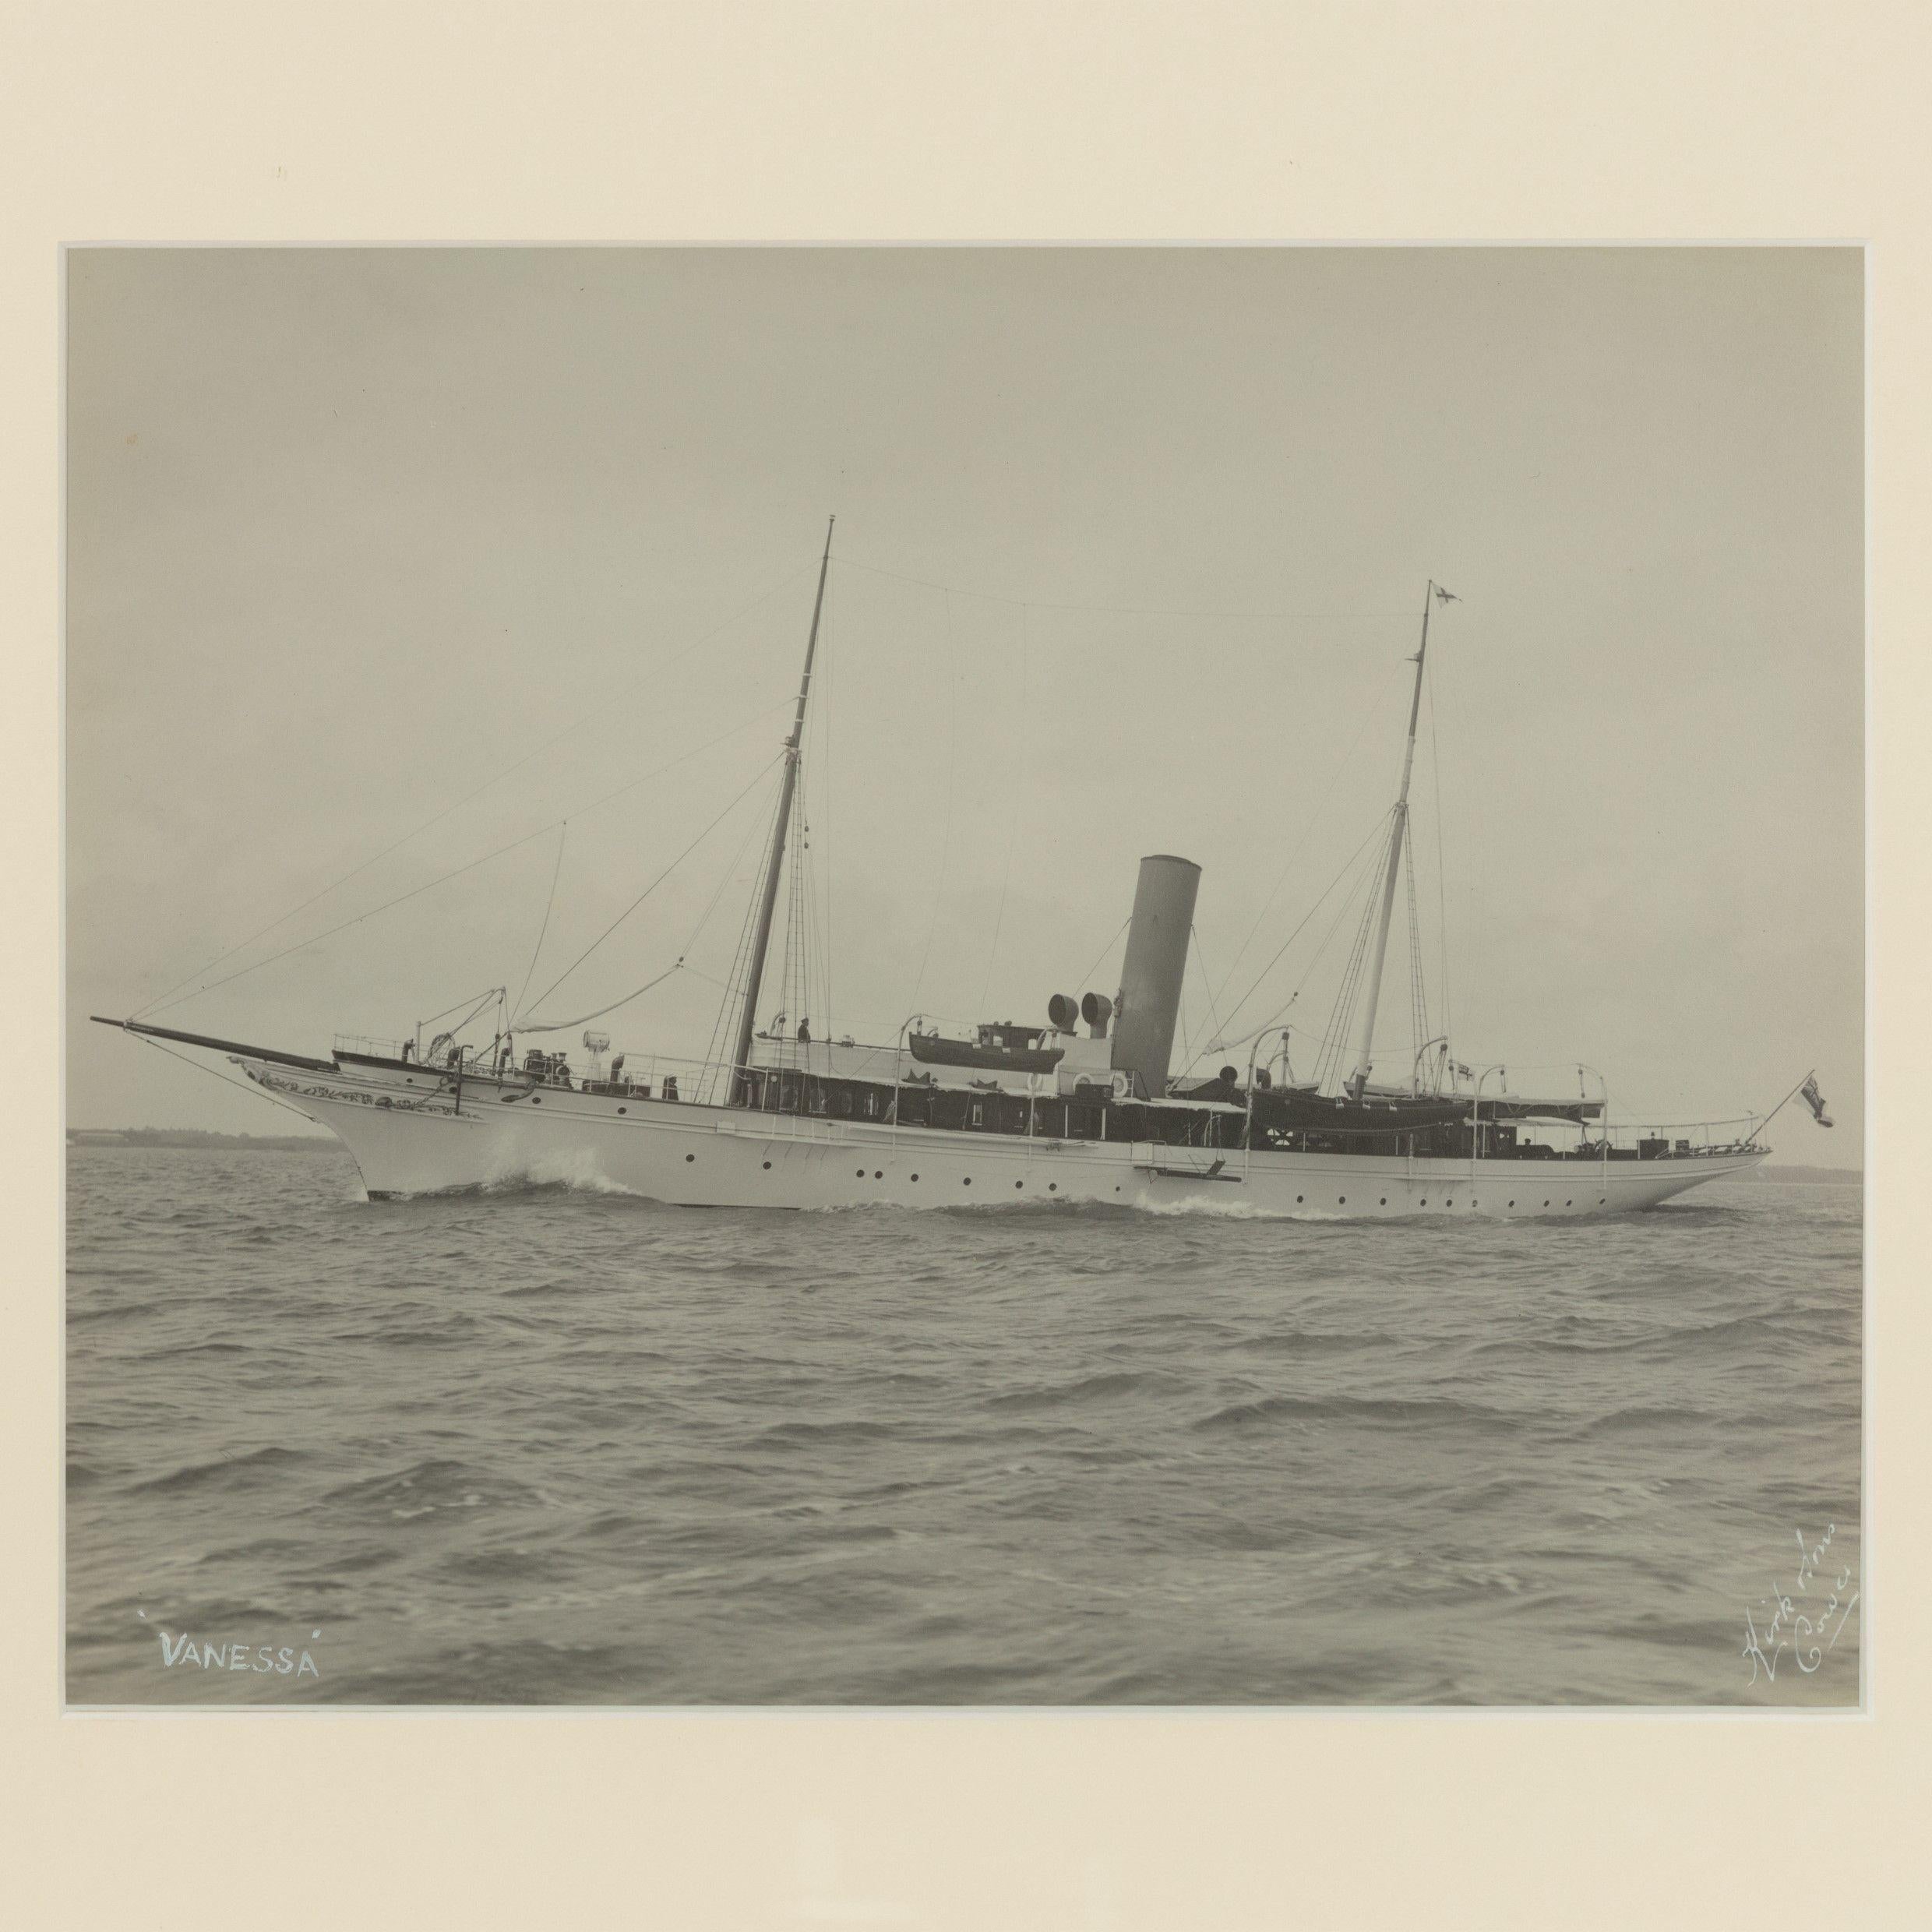 Early silver gelatin photographic print of the sailing yacht Venessa sailing in the Solent, flying the white ensign of the Royal Yacht Squadron, by Kirk and sons. Signed in white ink.

William Umpleby Kirk (Kirk and Sons) A photographer of the